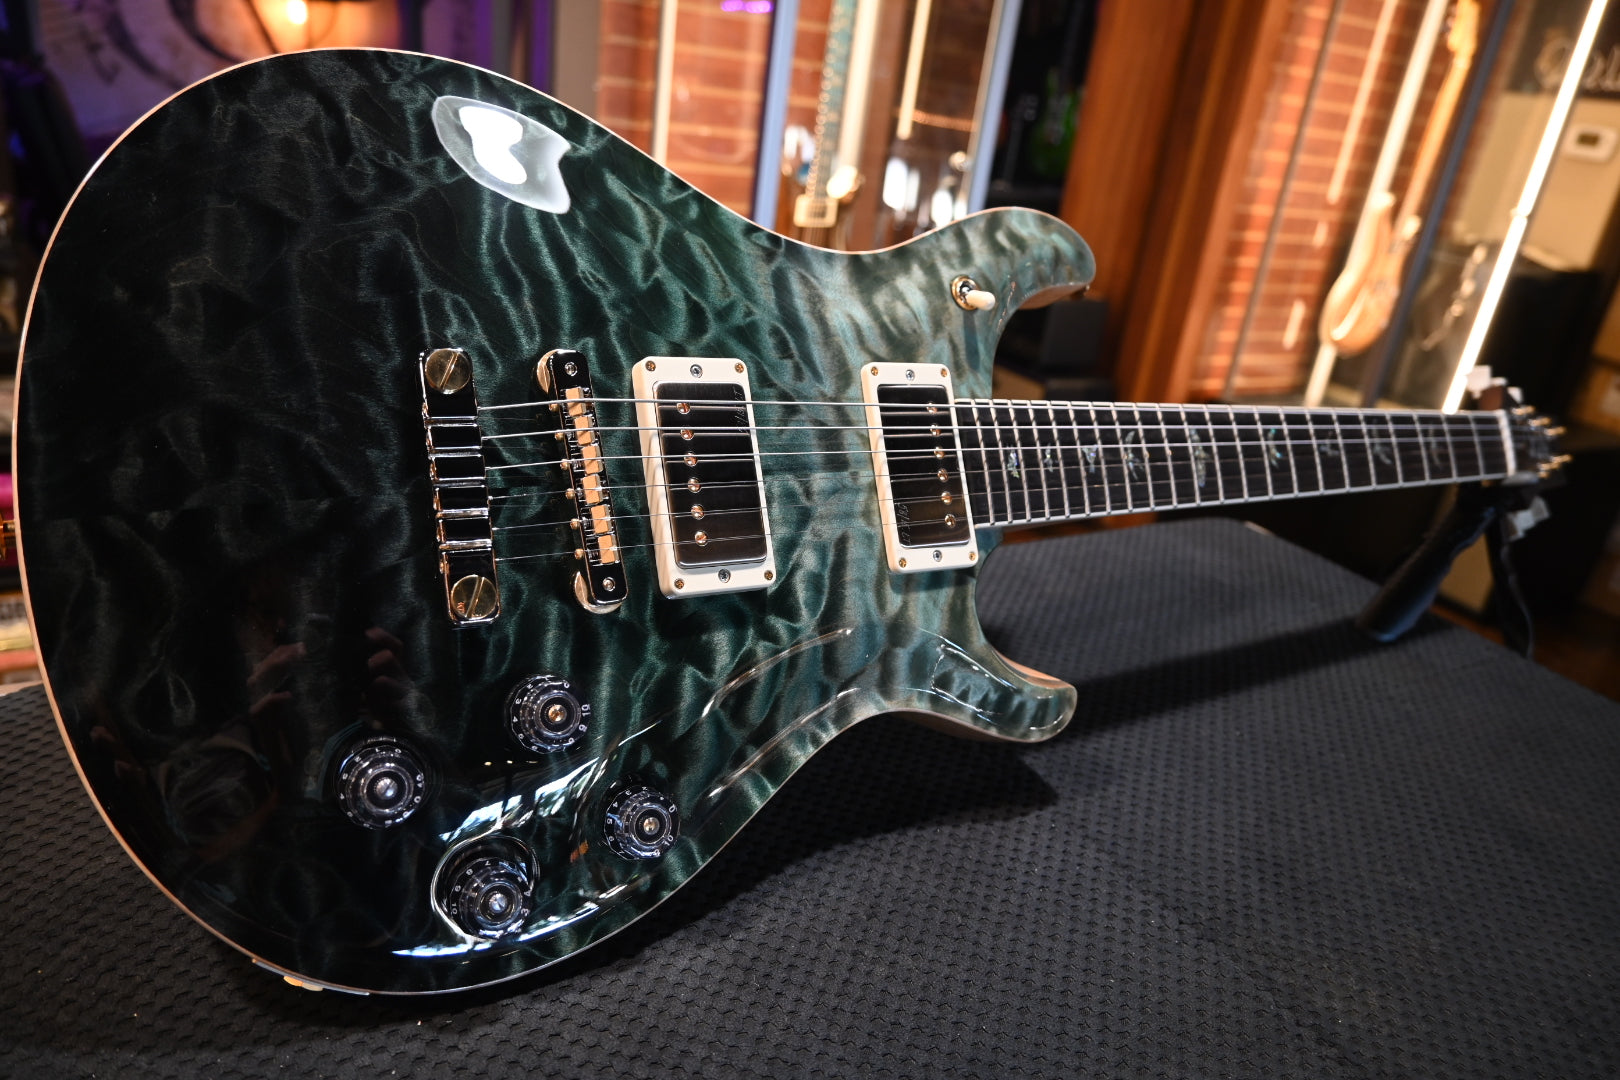 PRS Wood Library McCarty 594 10-Top Quilt Swamp Ash Torr. Maple Neck - Trampas Green Fade Guitar #9297 - Danville Music